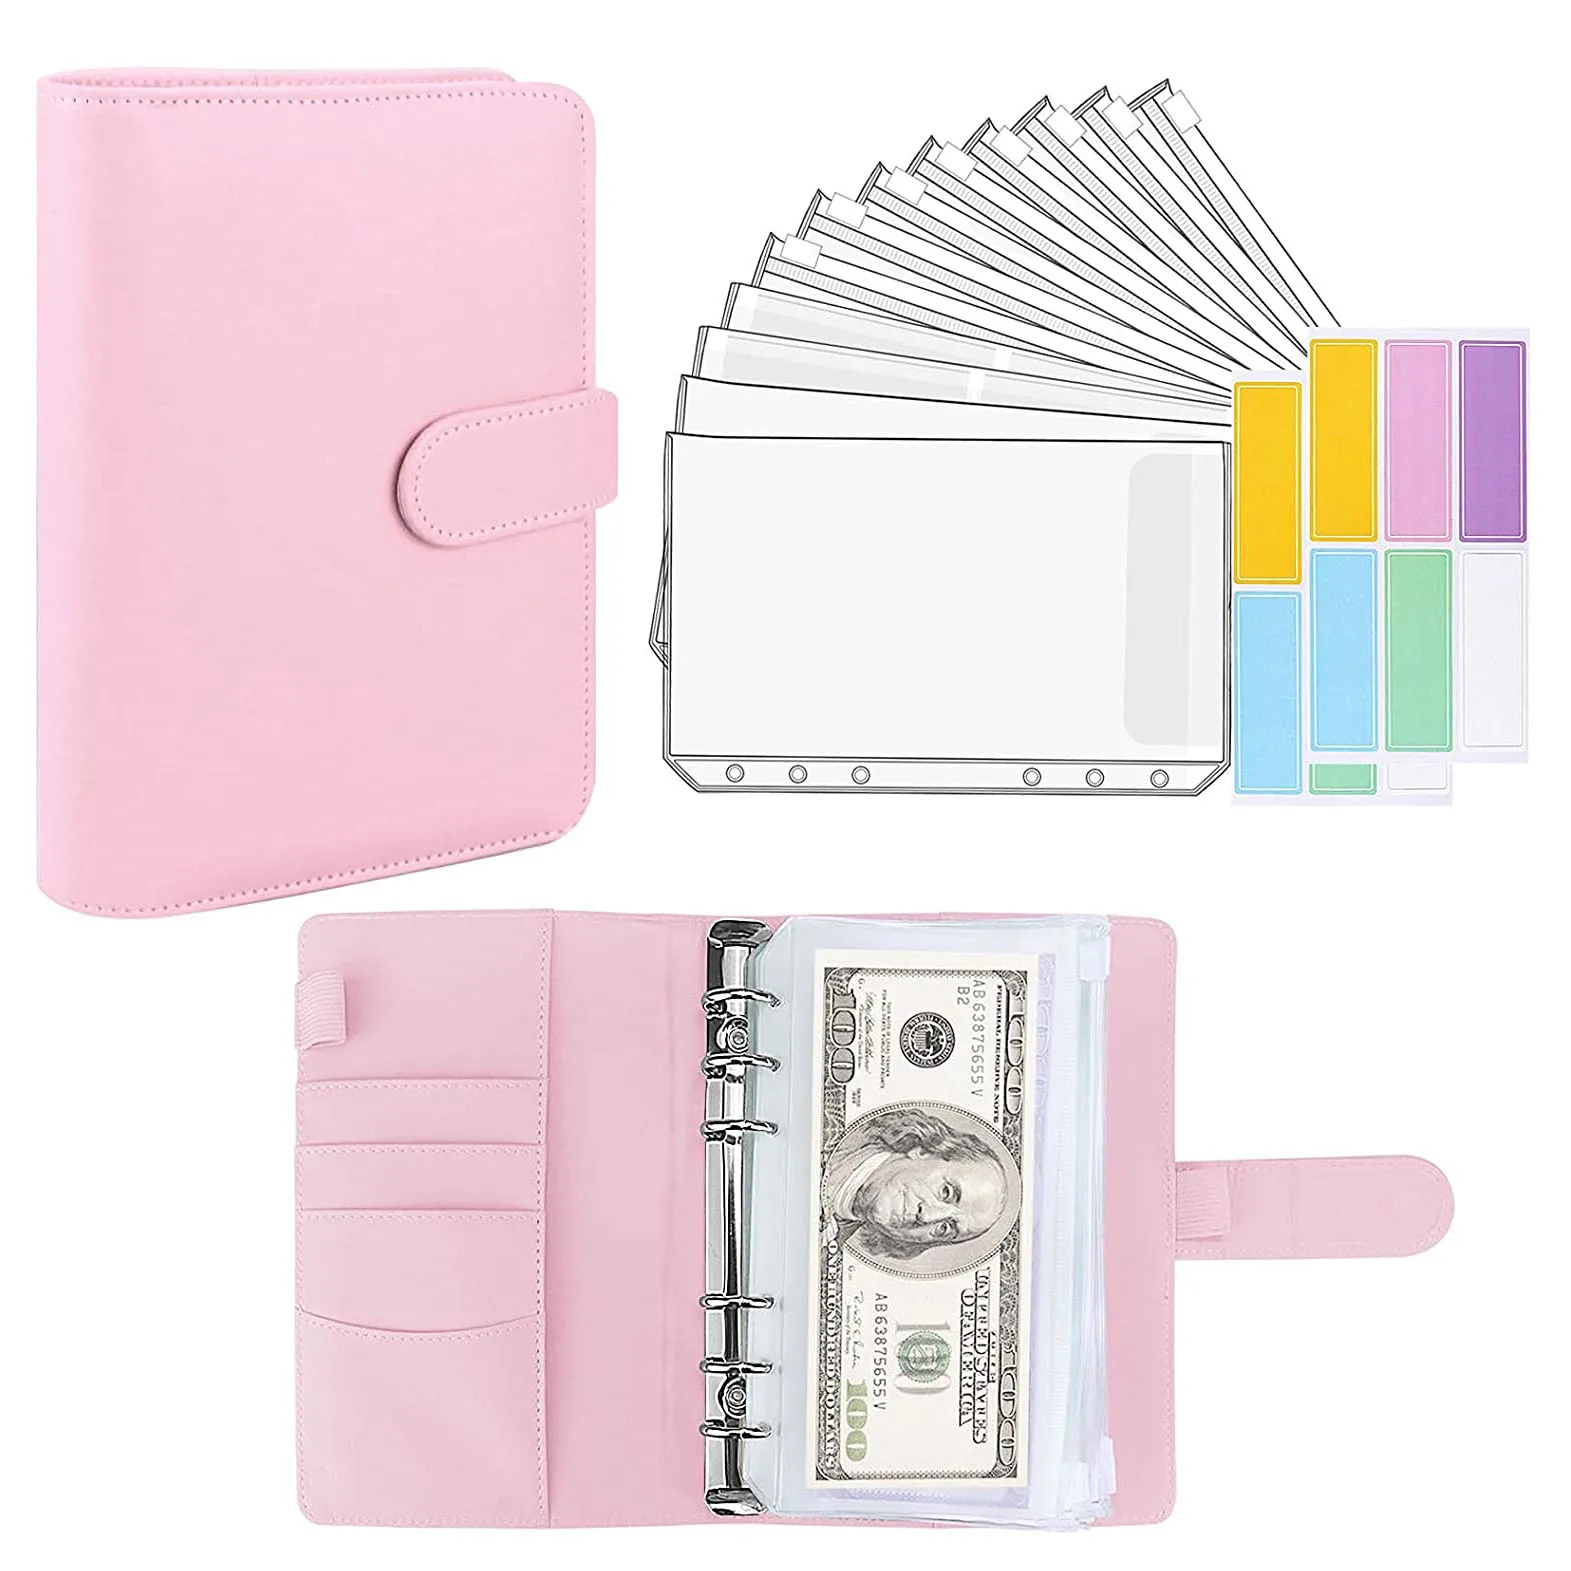 15 Pieces A6 Binder Budget Planner Cash Envelope System with Budget Envelopes Binder Pockets Cash Envelope Wallet for Budgeting a6 pu leather binder budget cash envelopes system planner organizer with 12pcs binder clear zipper pockets and label stickers